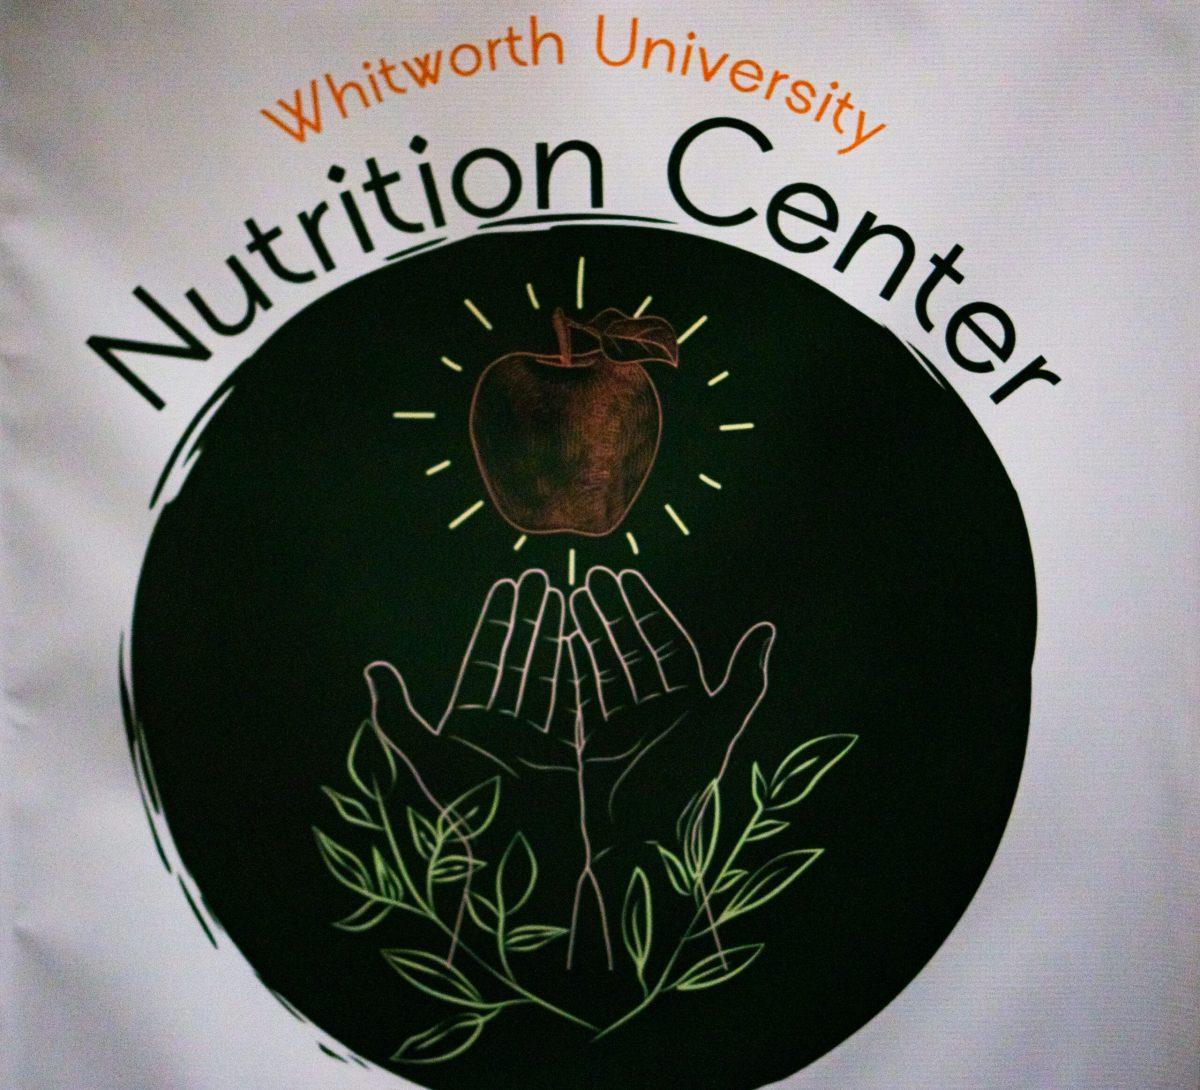 Pictures+of+Whitworth+Nutrition+Center+at+Whitworth+university+in+Spokane+Wash%2C+Friday%2C+Oct.+14%2C+2022+%7C+Photo+by+Juan+Rodriguez%2FThe+Whitworthian